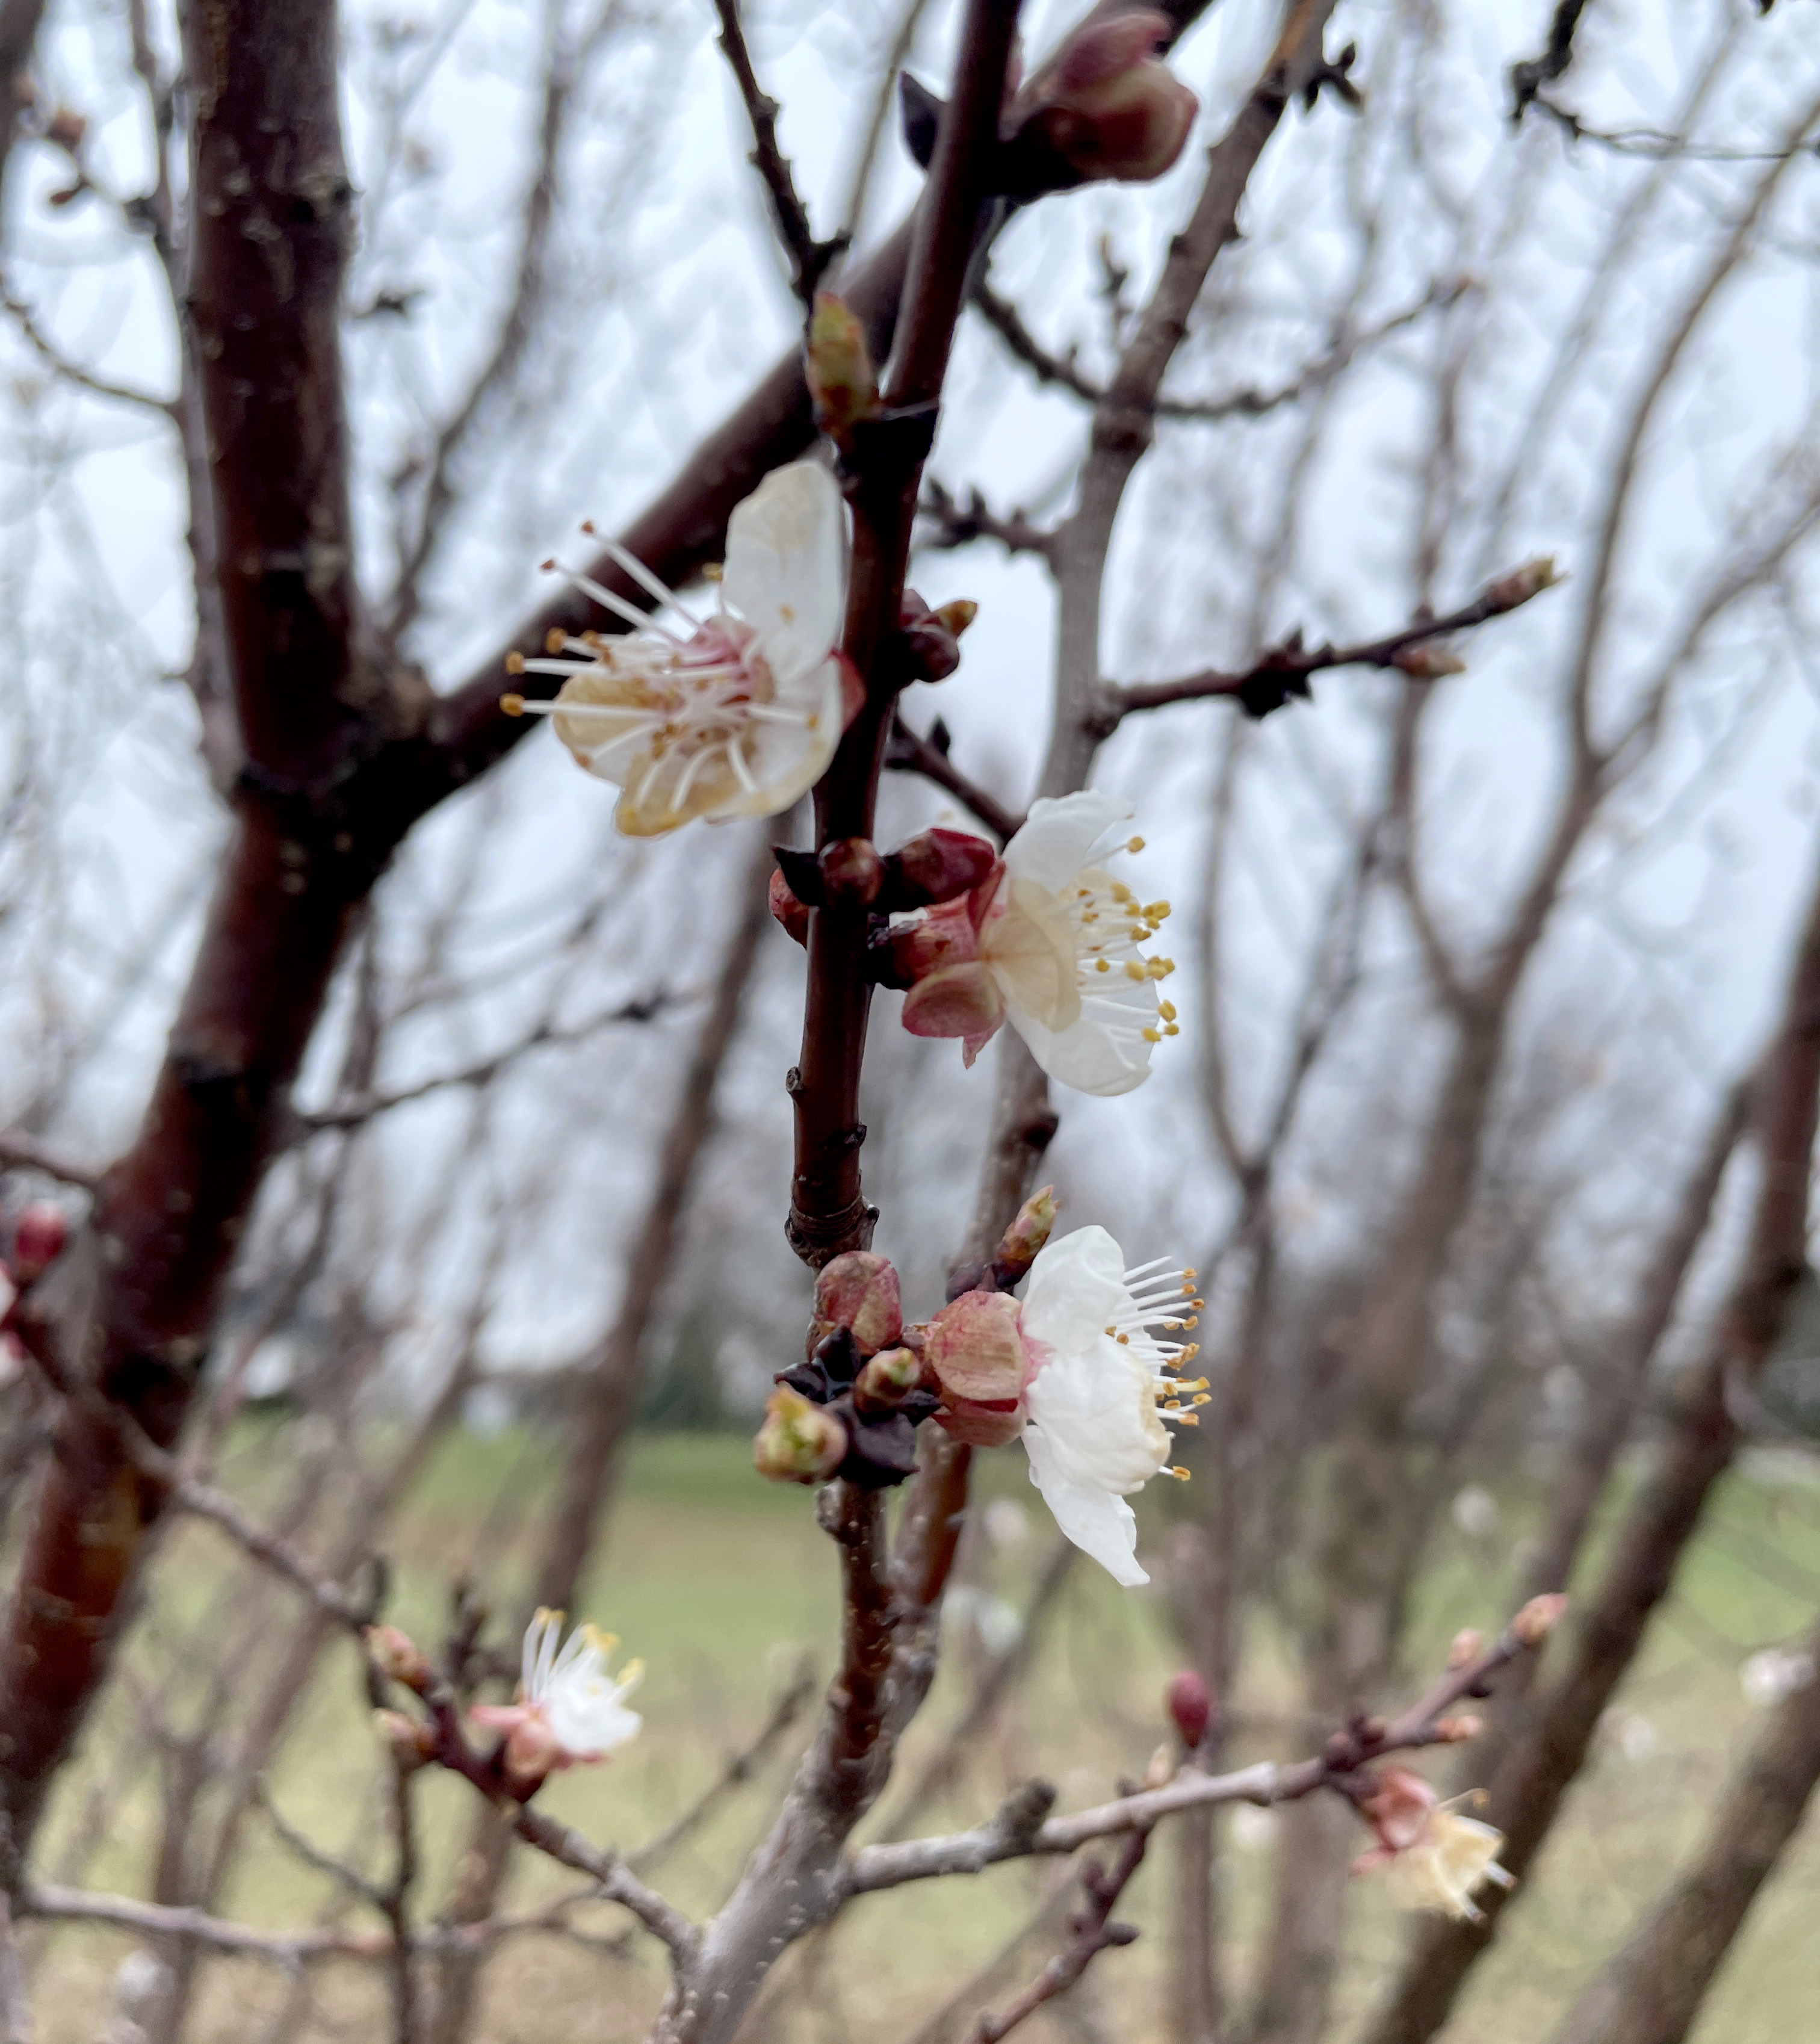 Apricot buds on an apricot tree.